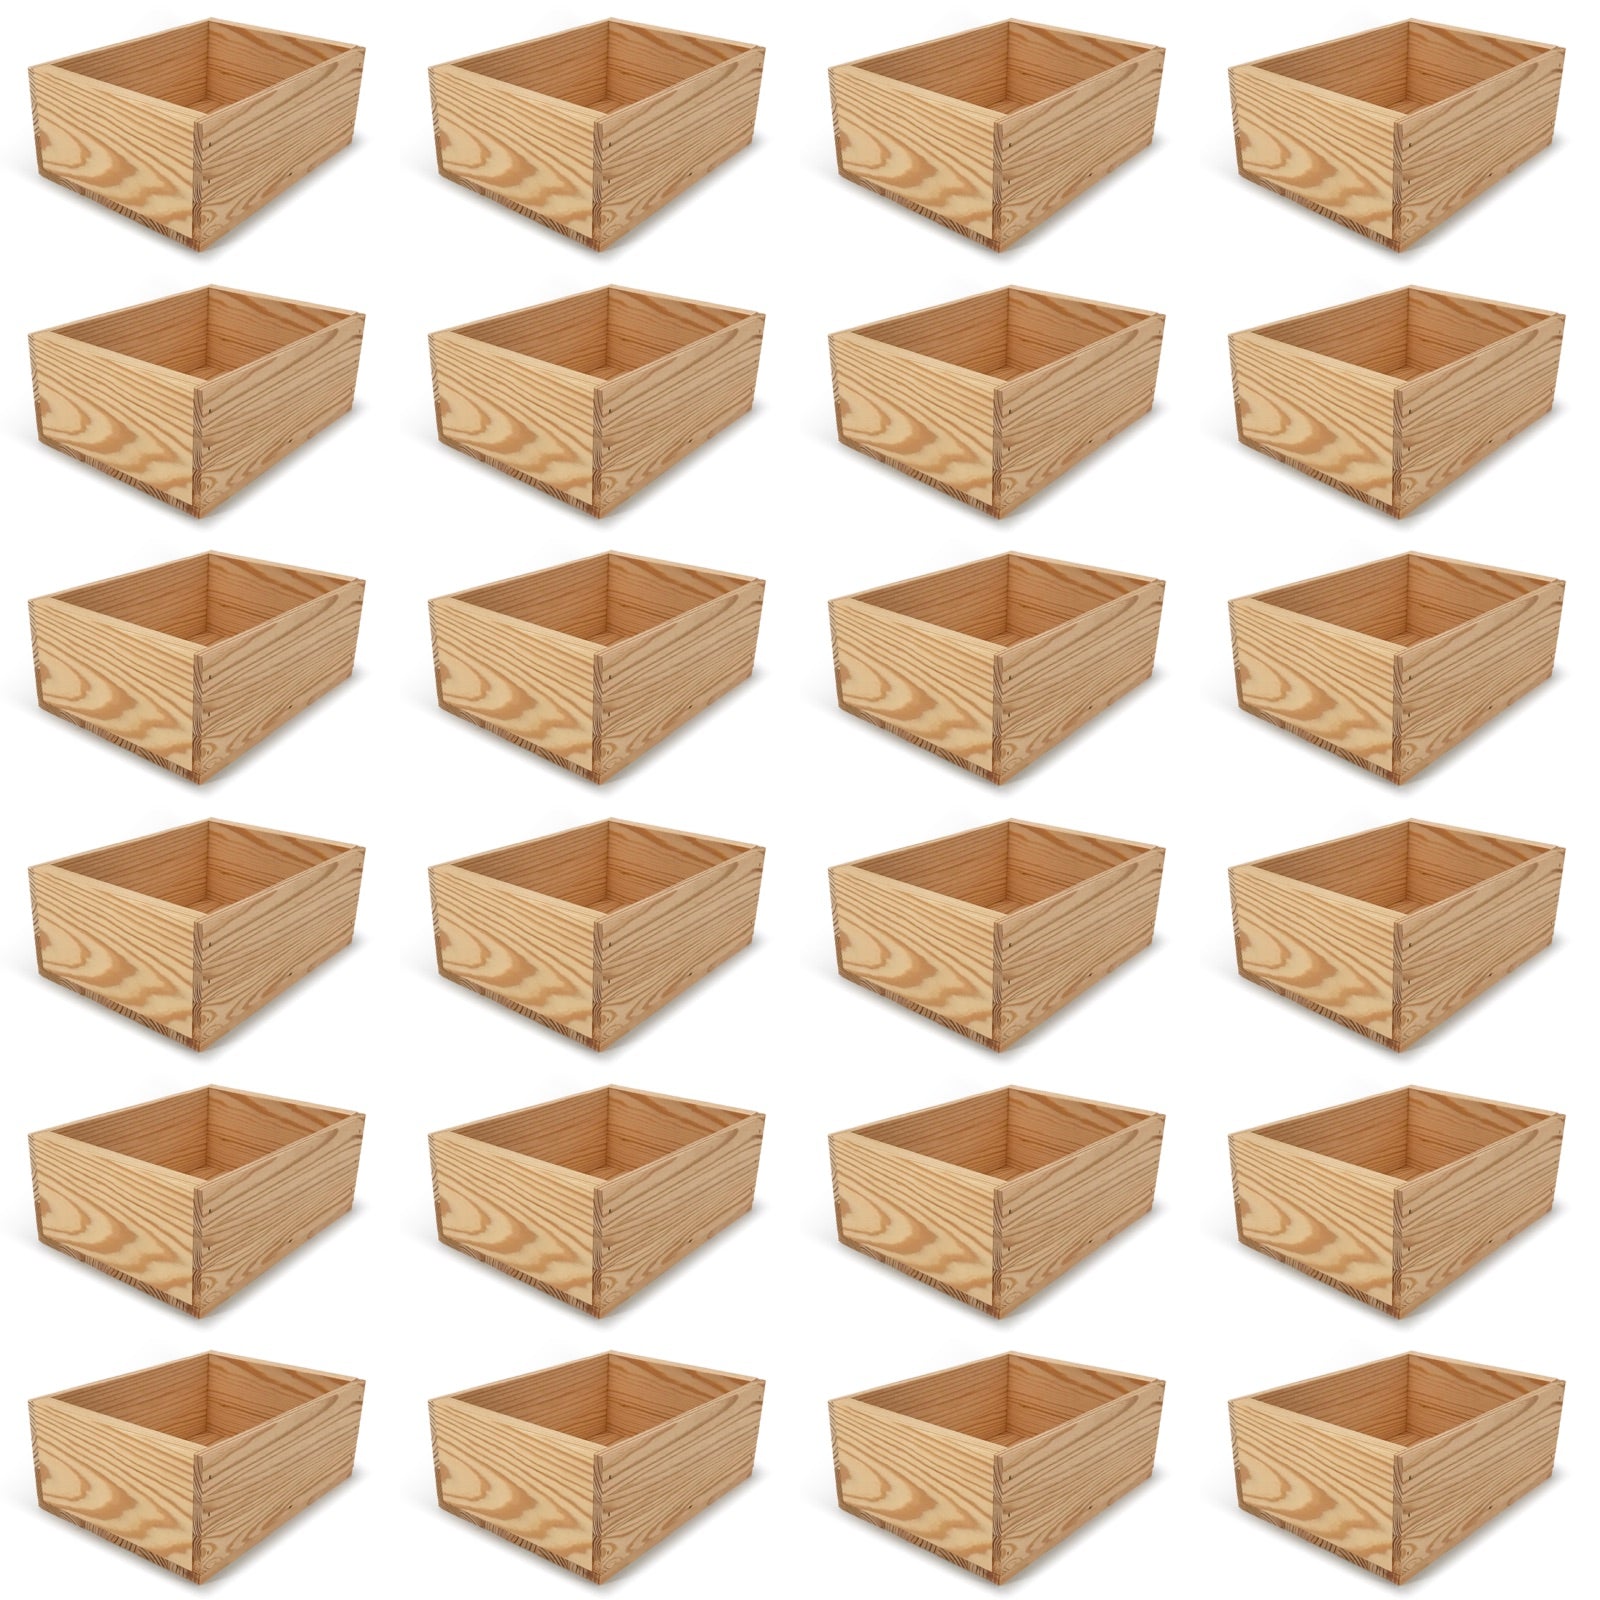 24 Small wooden crates 10x8x4.25